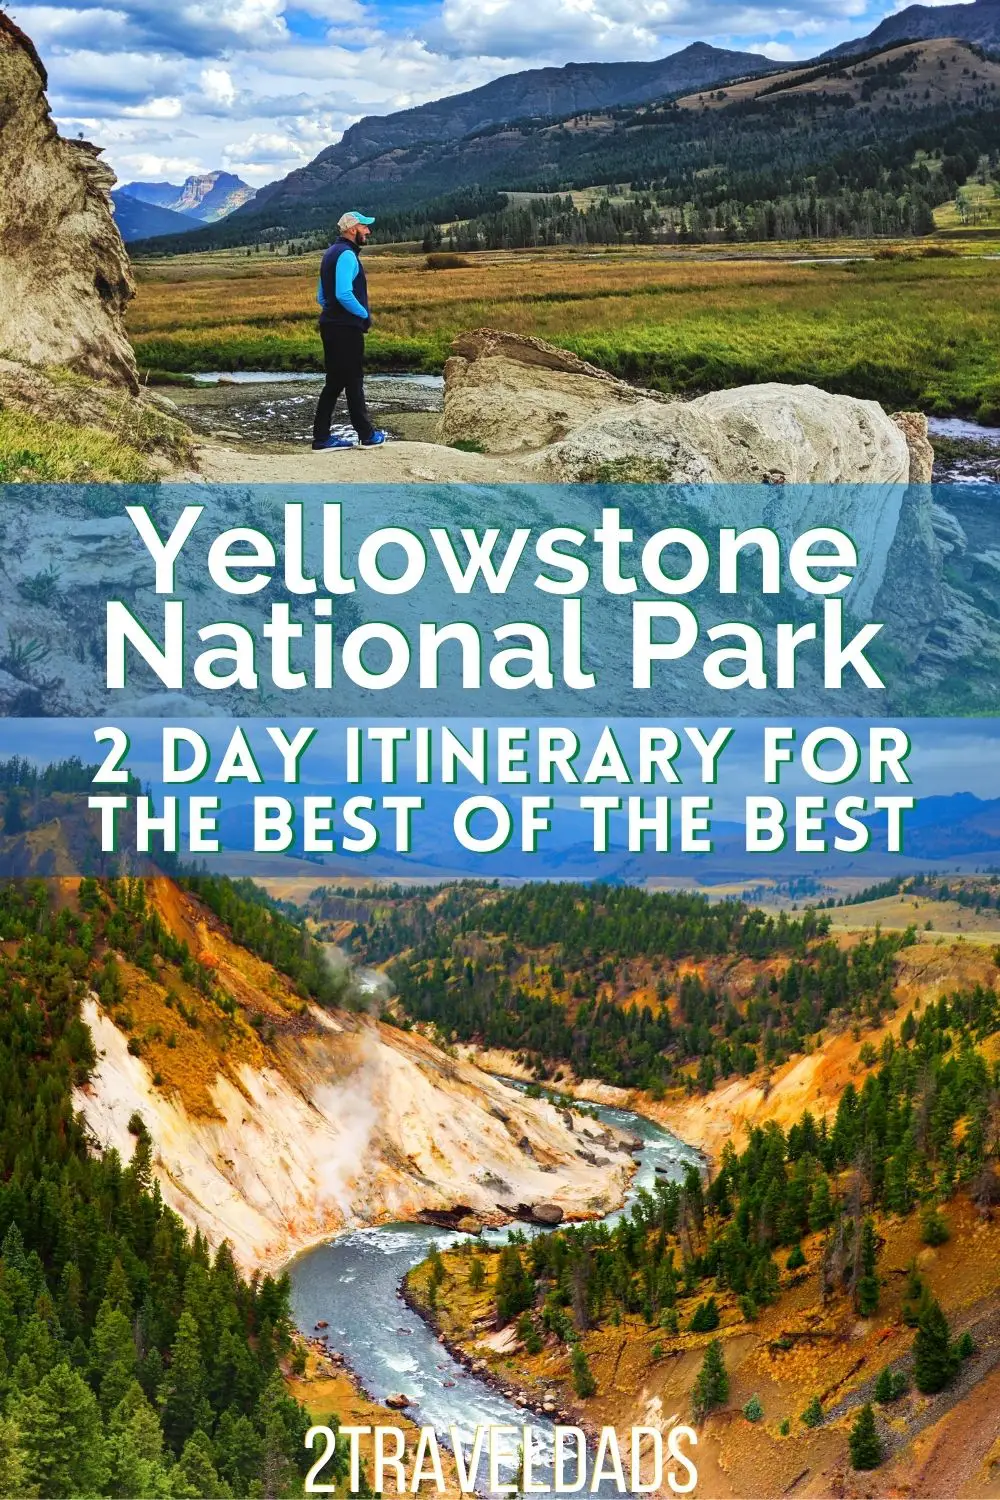 Our 2 Day Best of Yellowstone National Park itinerary: from the Grand Canyon of Yellowstone, Norris Geysers, Old Faithful and Yellowstone Lake, each itinerary route is its own day in the park and covers the best sights and tips for enjoying driving through Yellowstone National Park.